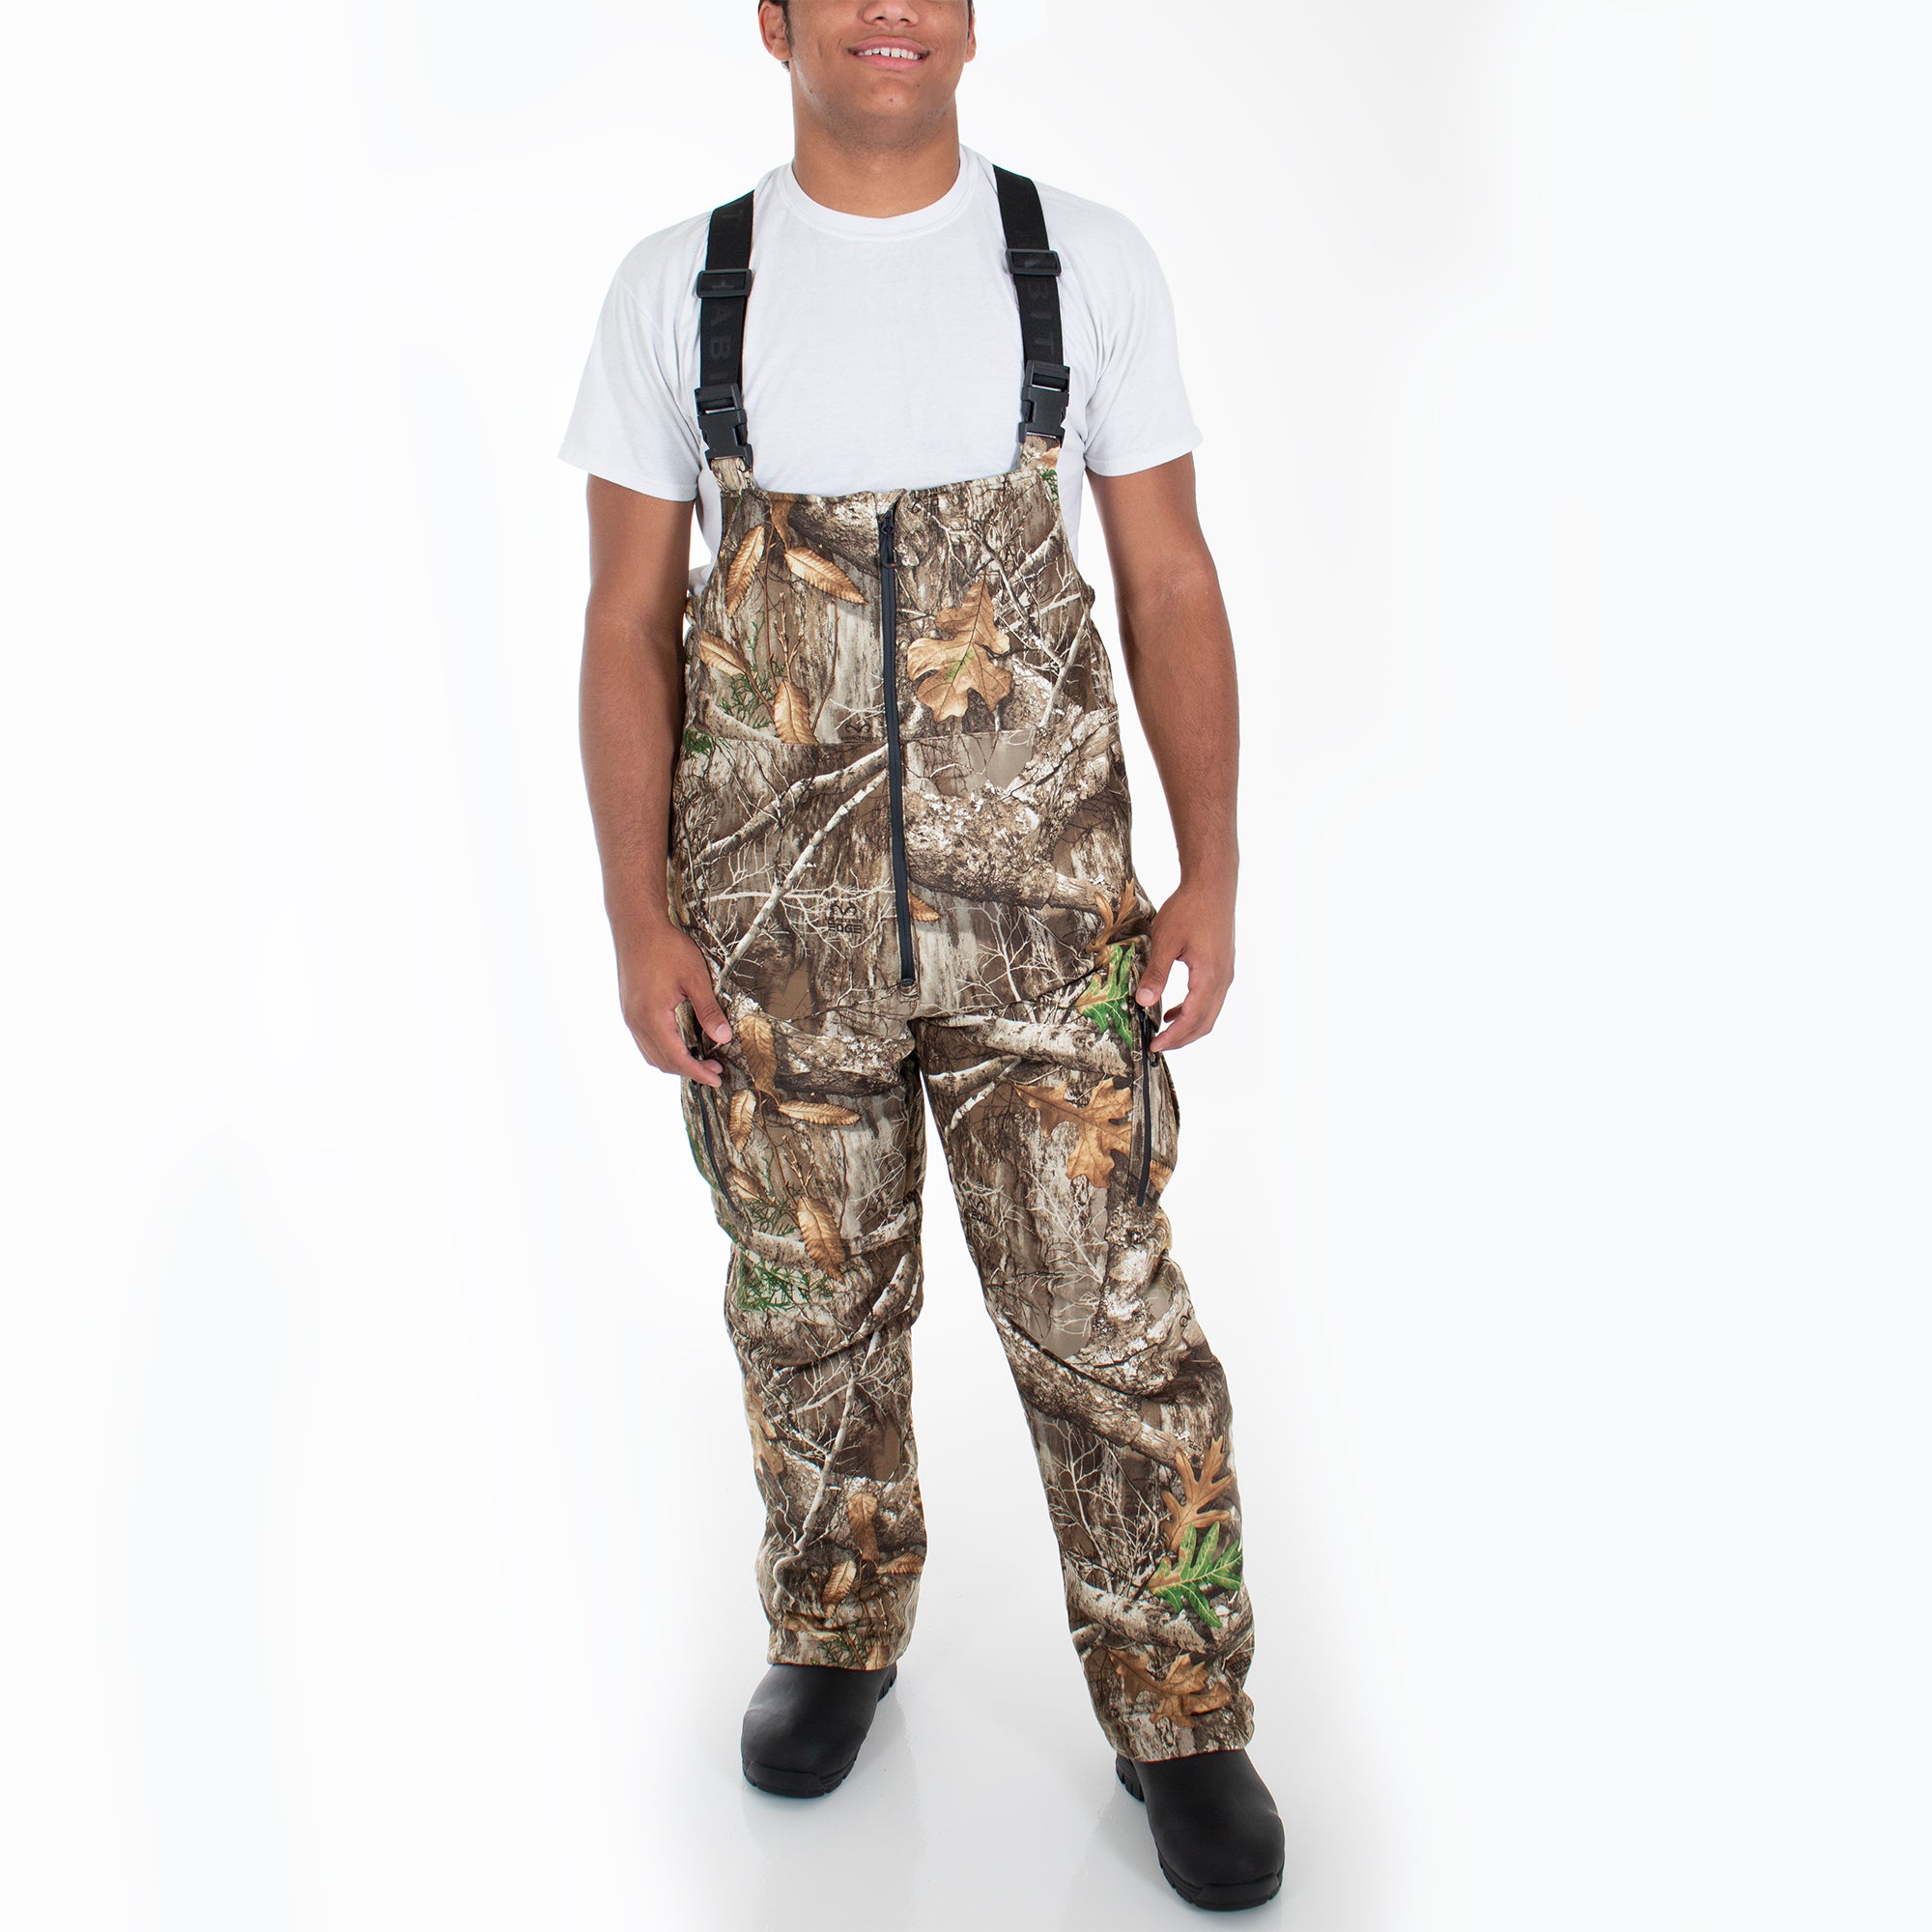 Men's Country Trek Stretch Waterproof Insulated Bib Realtree Edge front on model